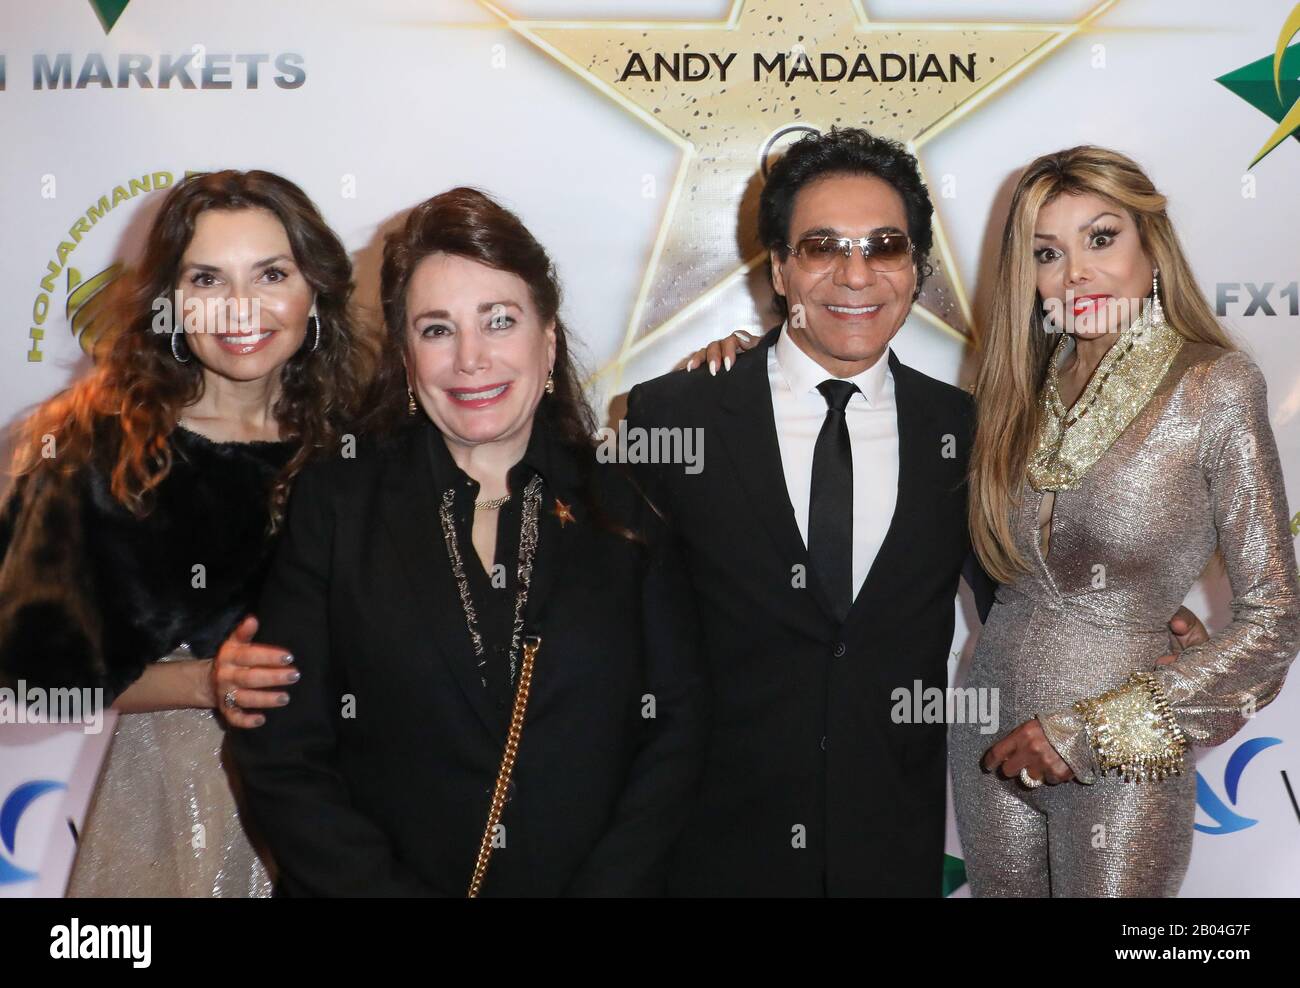 Andy Madadian Walk of Fame Star After Party at the Hollywood Museum in Hollywood, California on January 17, 2020 Featuring: Shani Rigsbee, Donelle Dadigan, Andy Madadian, La Toya Jackson Where: Hollywood, California, United States When: 17 Jan 2020 Credit: Sheri Determan/WENN.com Stock Photo